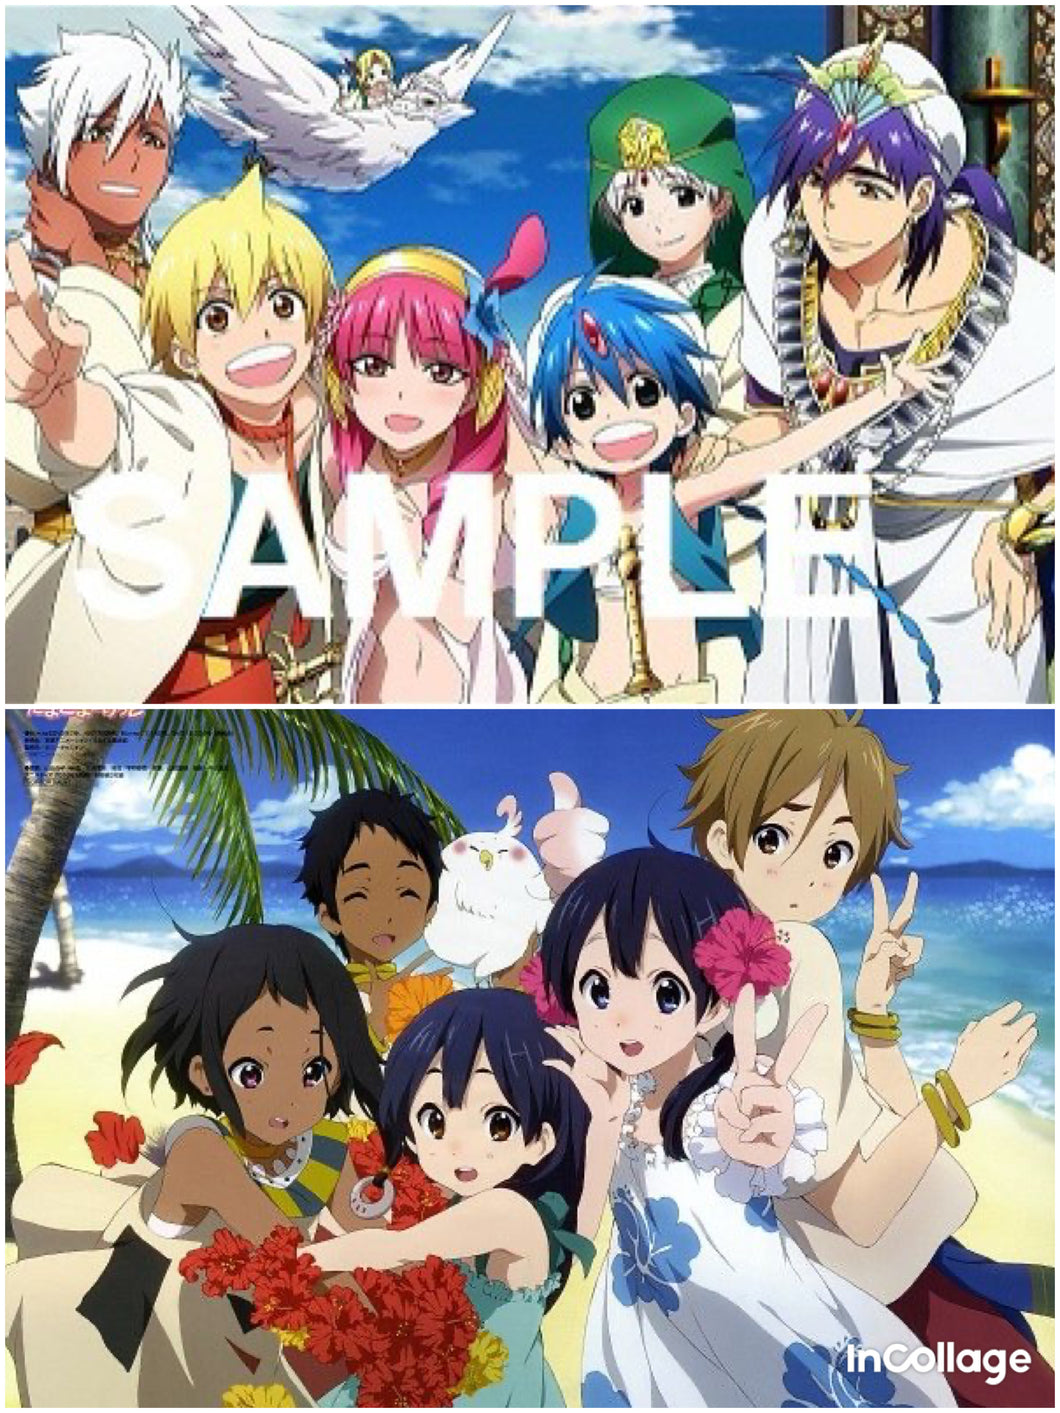 Magi - The Labyrinth of Magic / Tamaki Market - B3 Double-sided Poster - DVD/Blu-ray Promo Poster